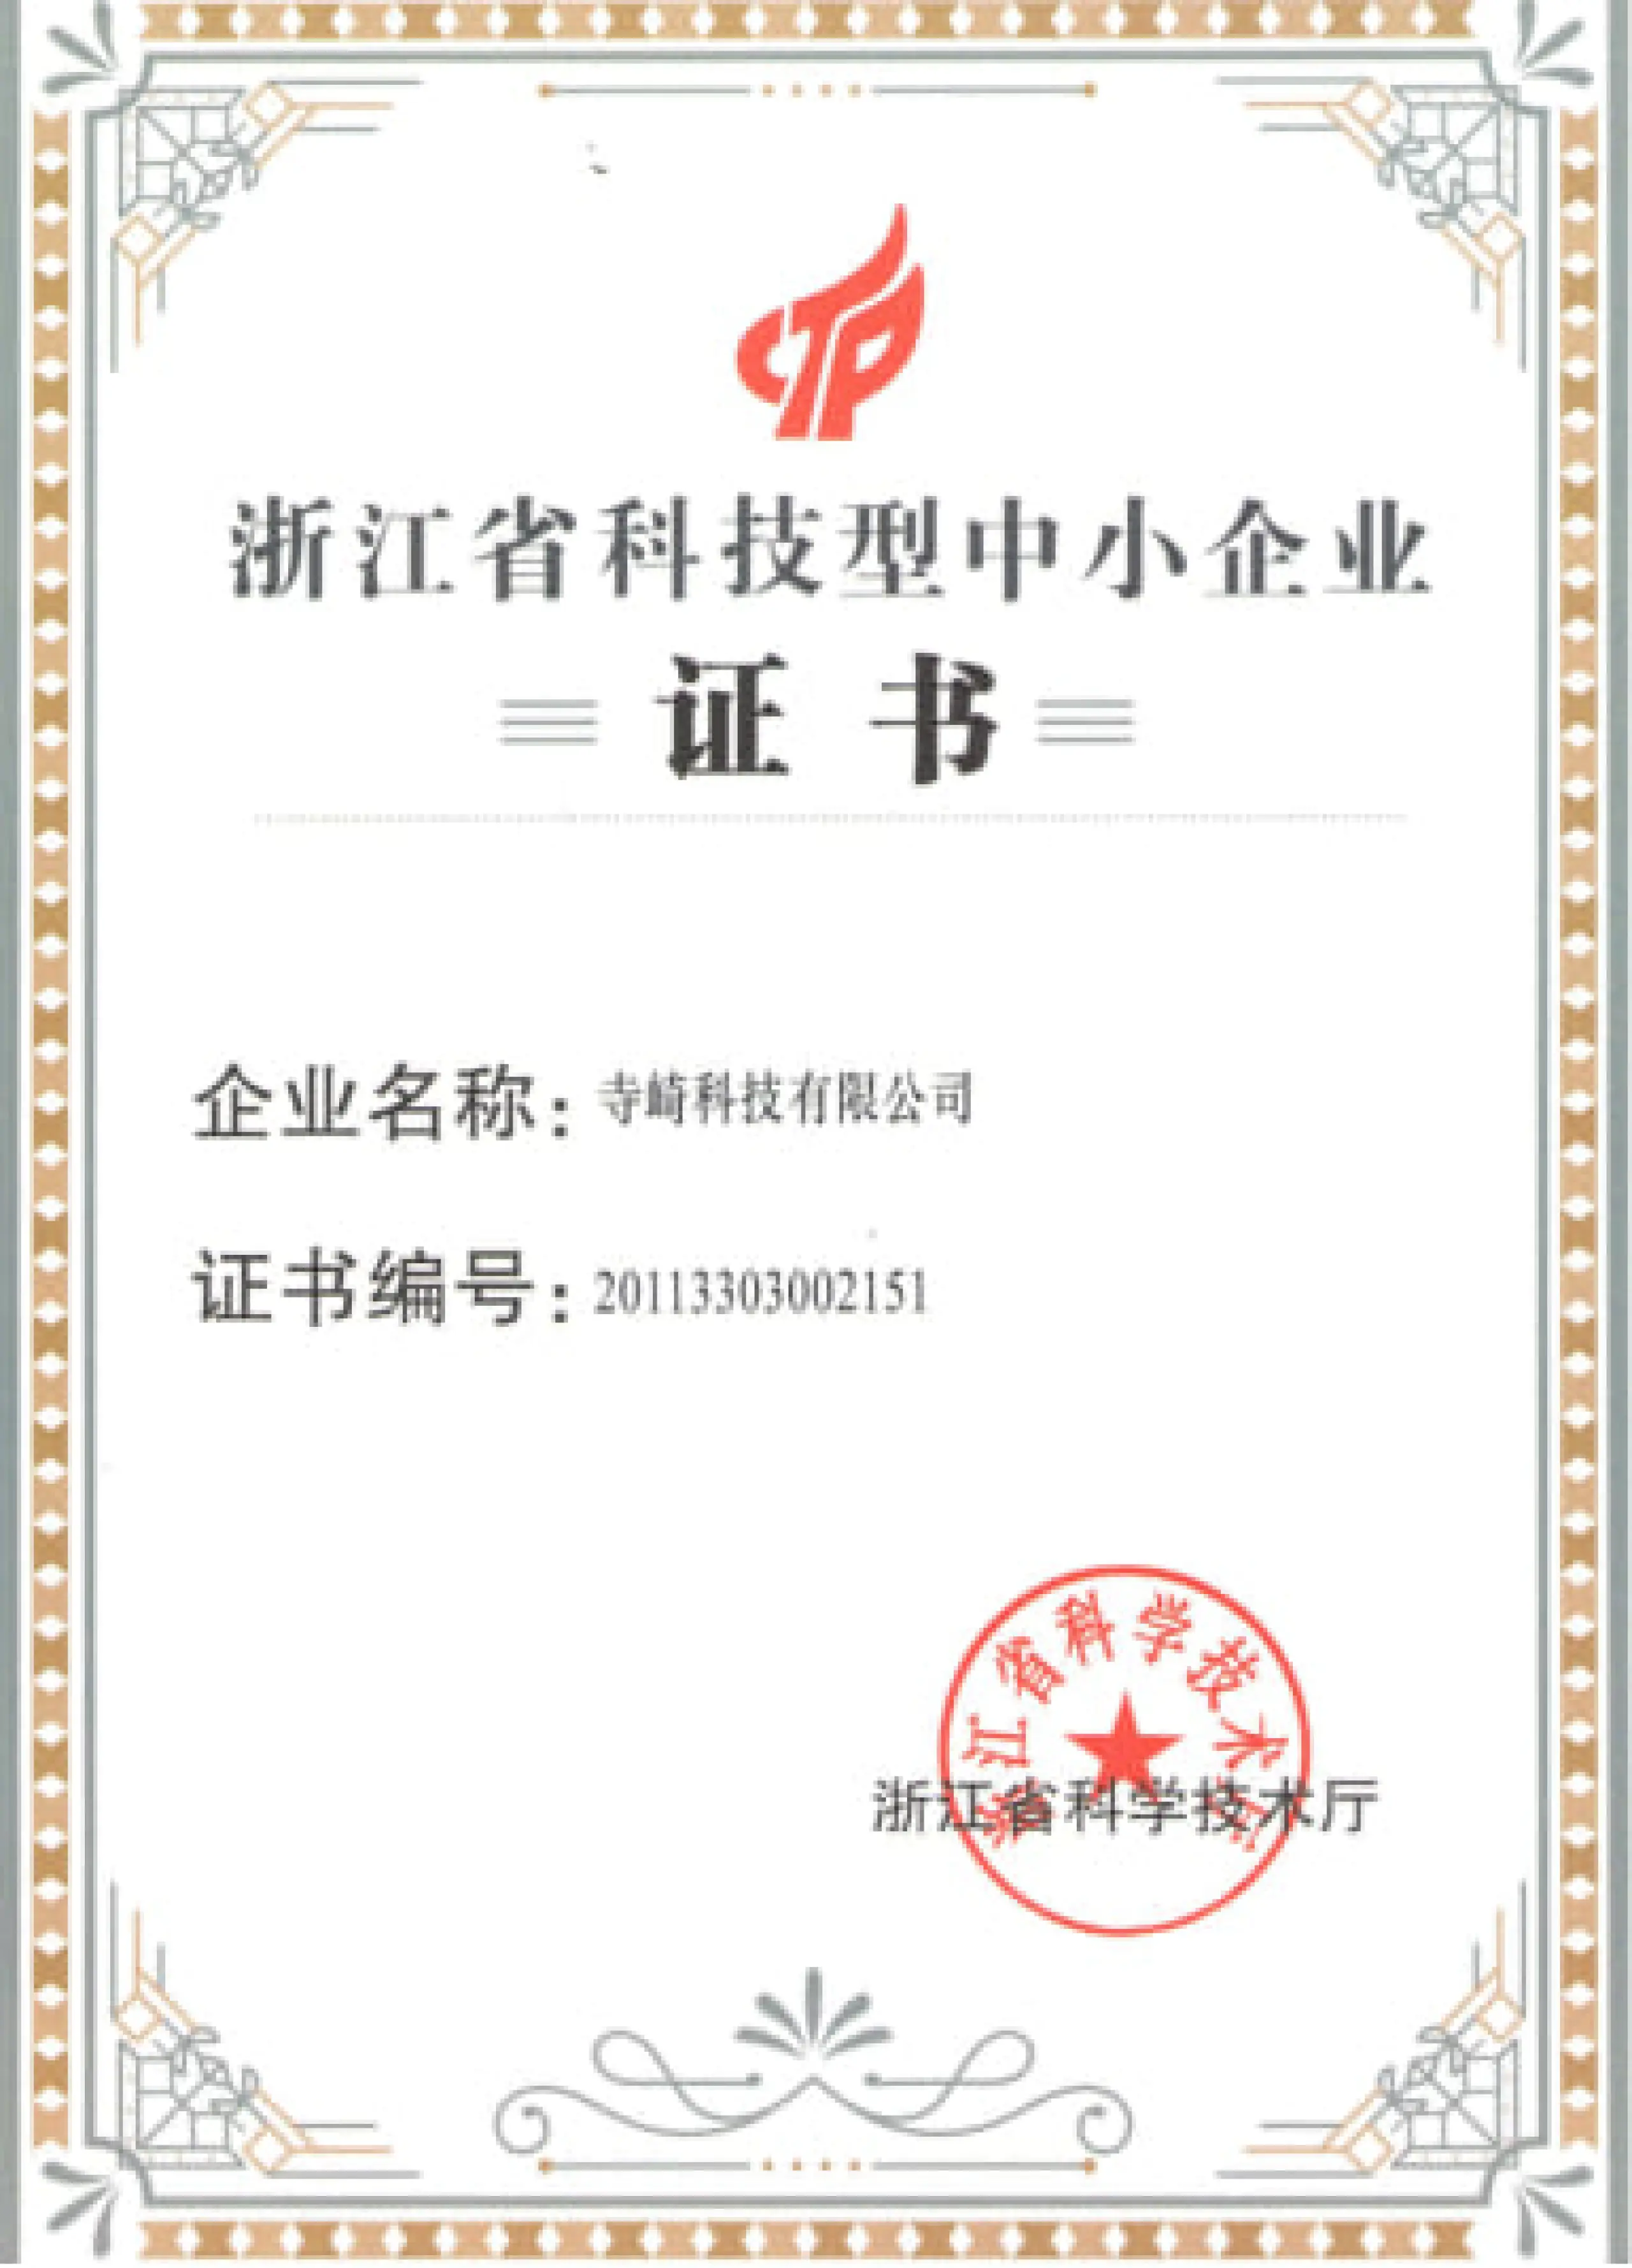 Certificate Of Science And Technology Enterprises